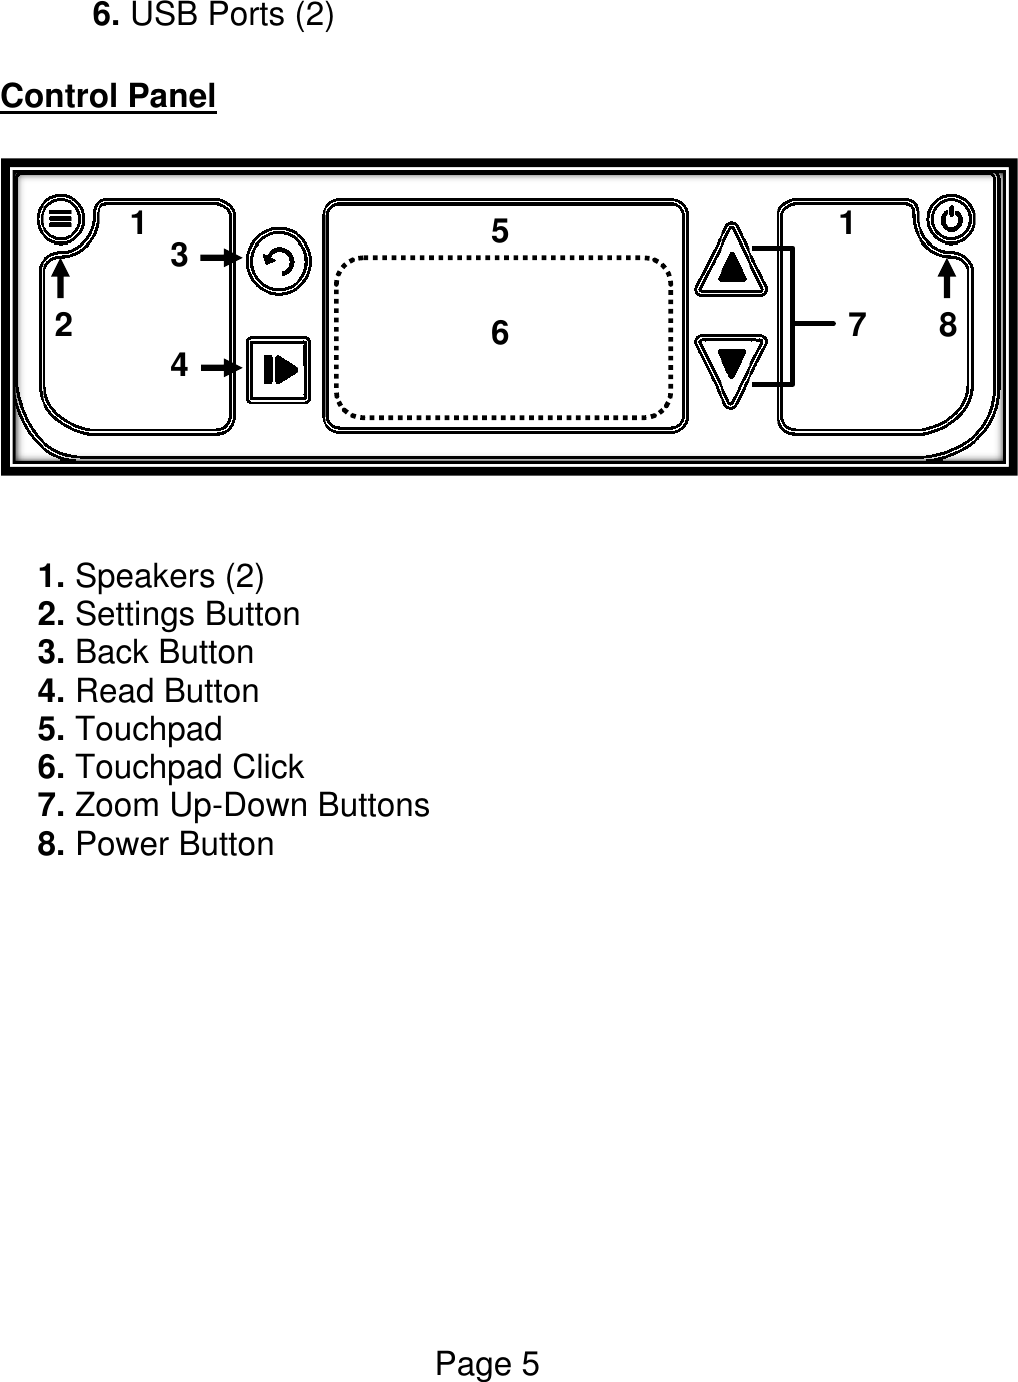 Page 5  6. USB Ports (2)  Control Panel     1. Speakers (2) 2. Settings Button 3. Back Button 4. Read Button 5. Touchpad 6. Touchpad Click 7. Zoom Up-Down Buttons 8. Power Button         1  1  5  4  3  2  6  7  8  